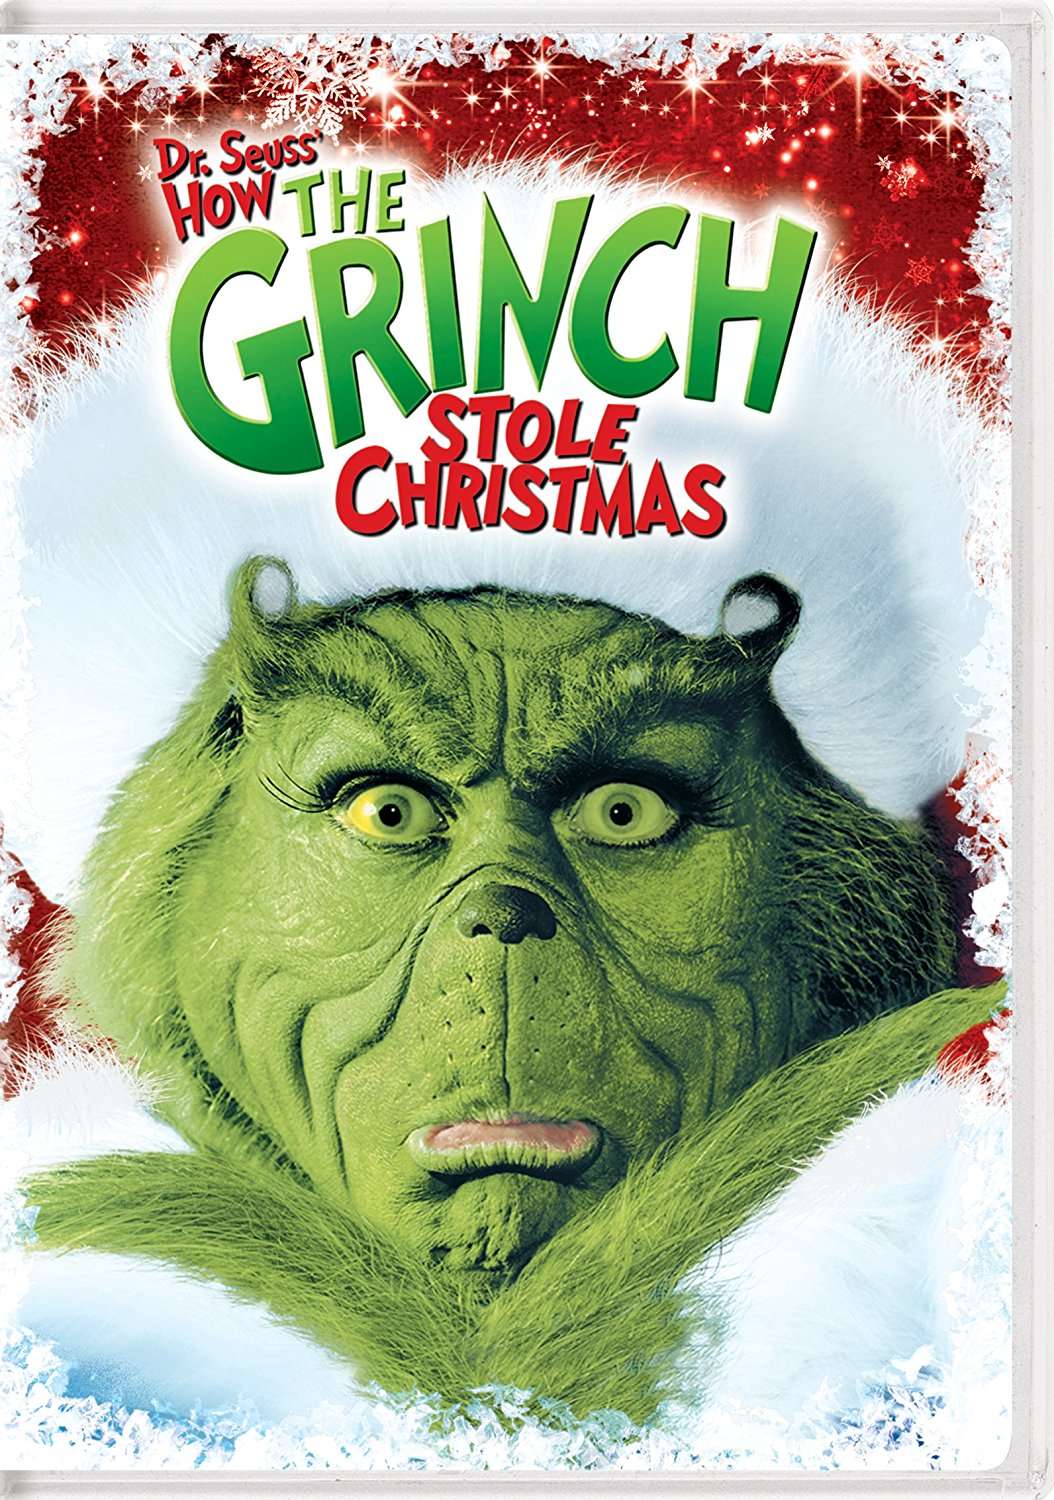 How the grinch stole christmas by dr seuss specopm